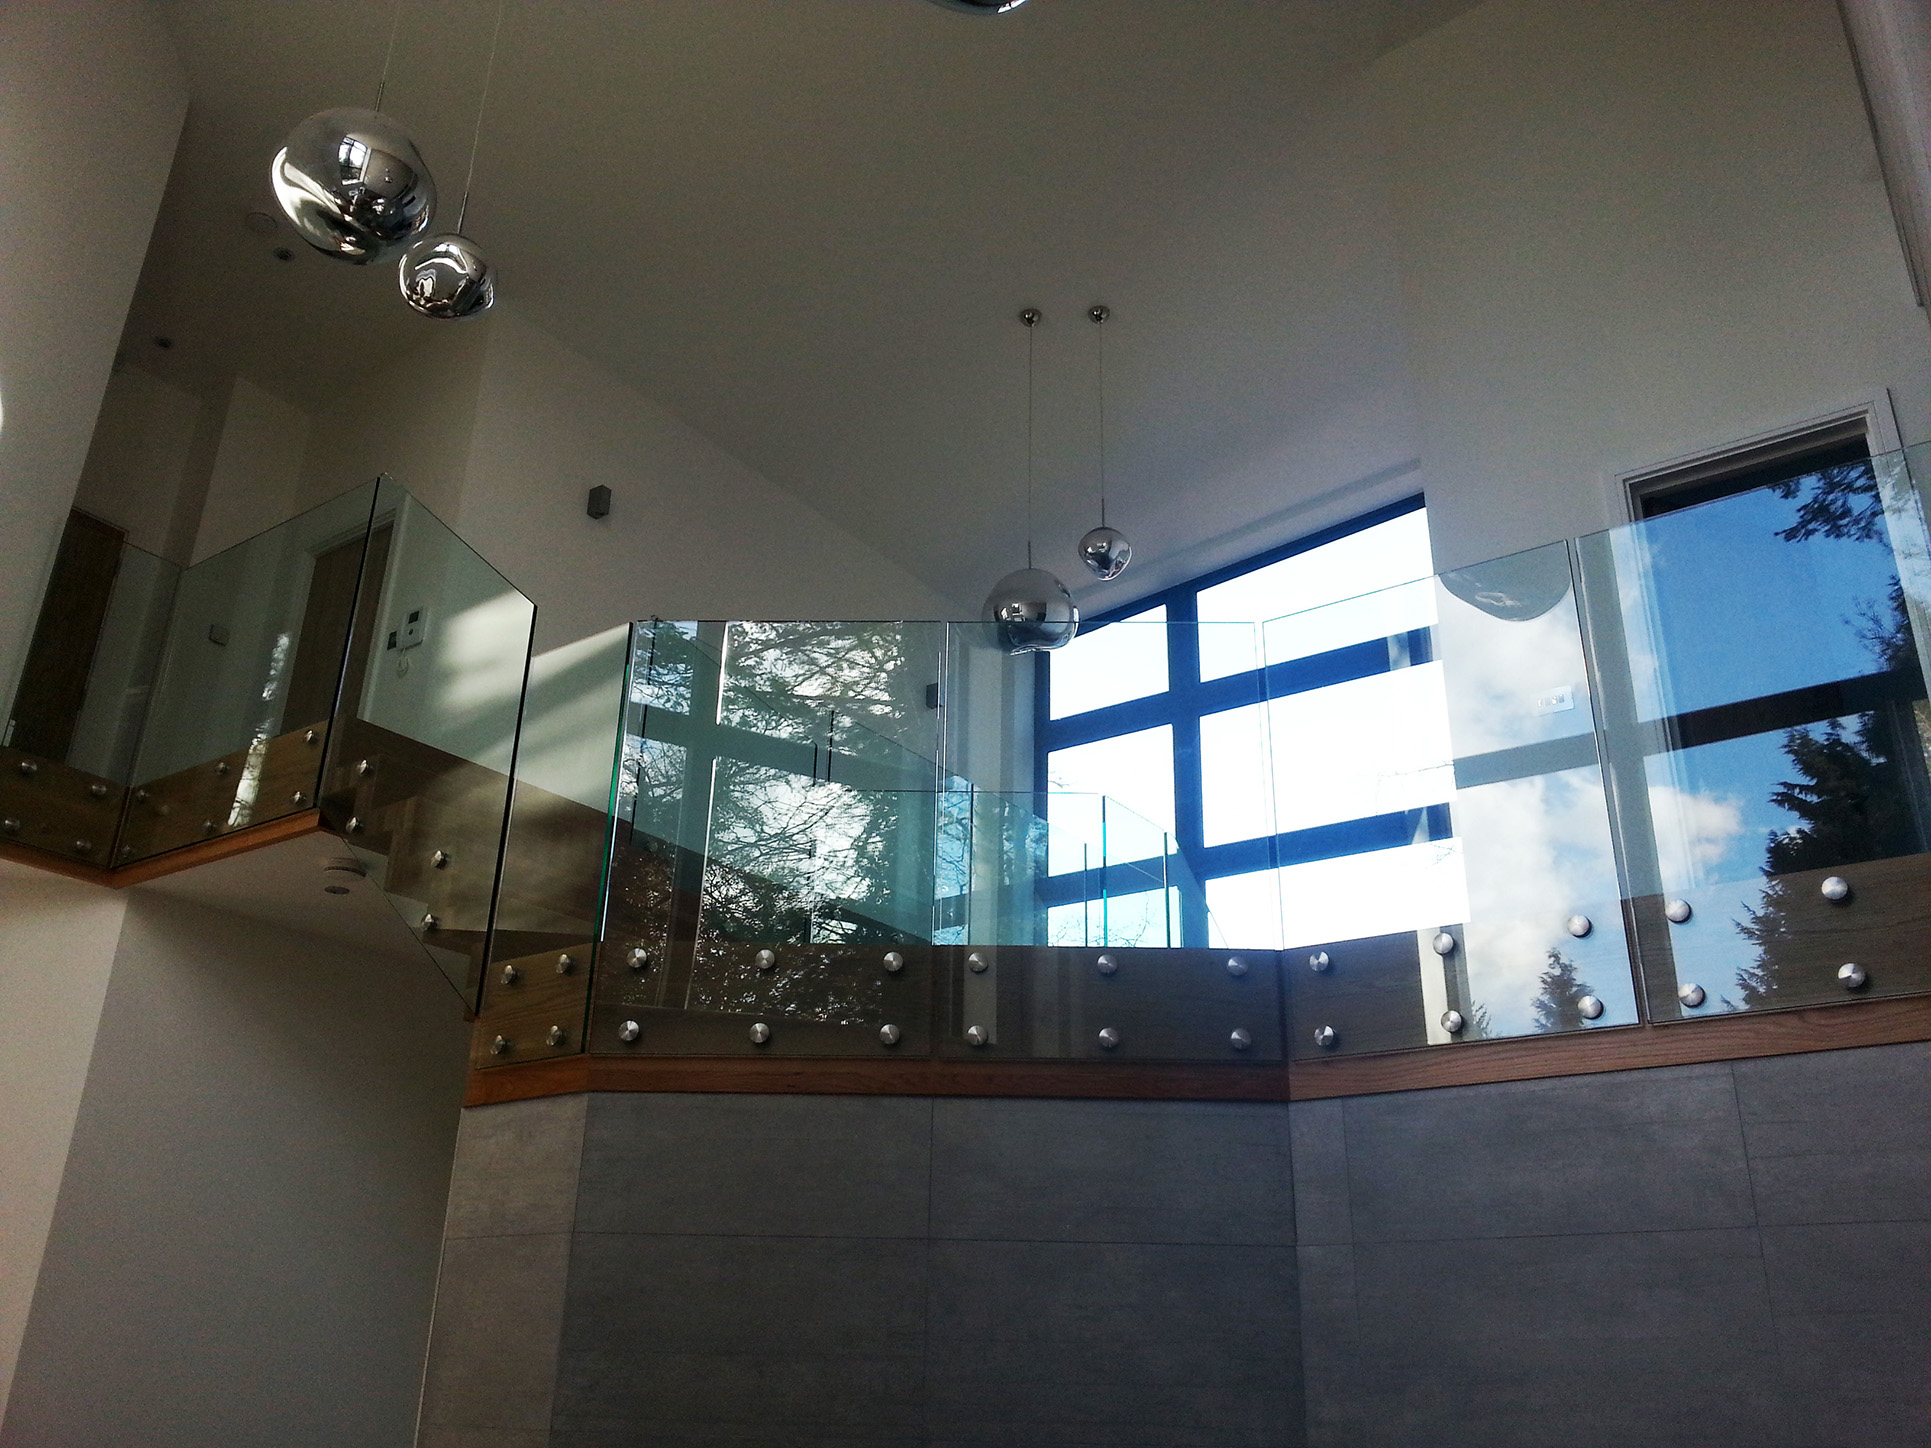 Large glass balustrade on stairs